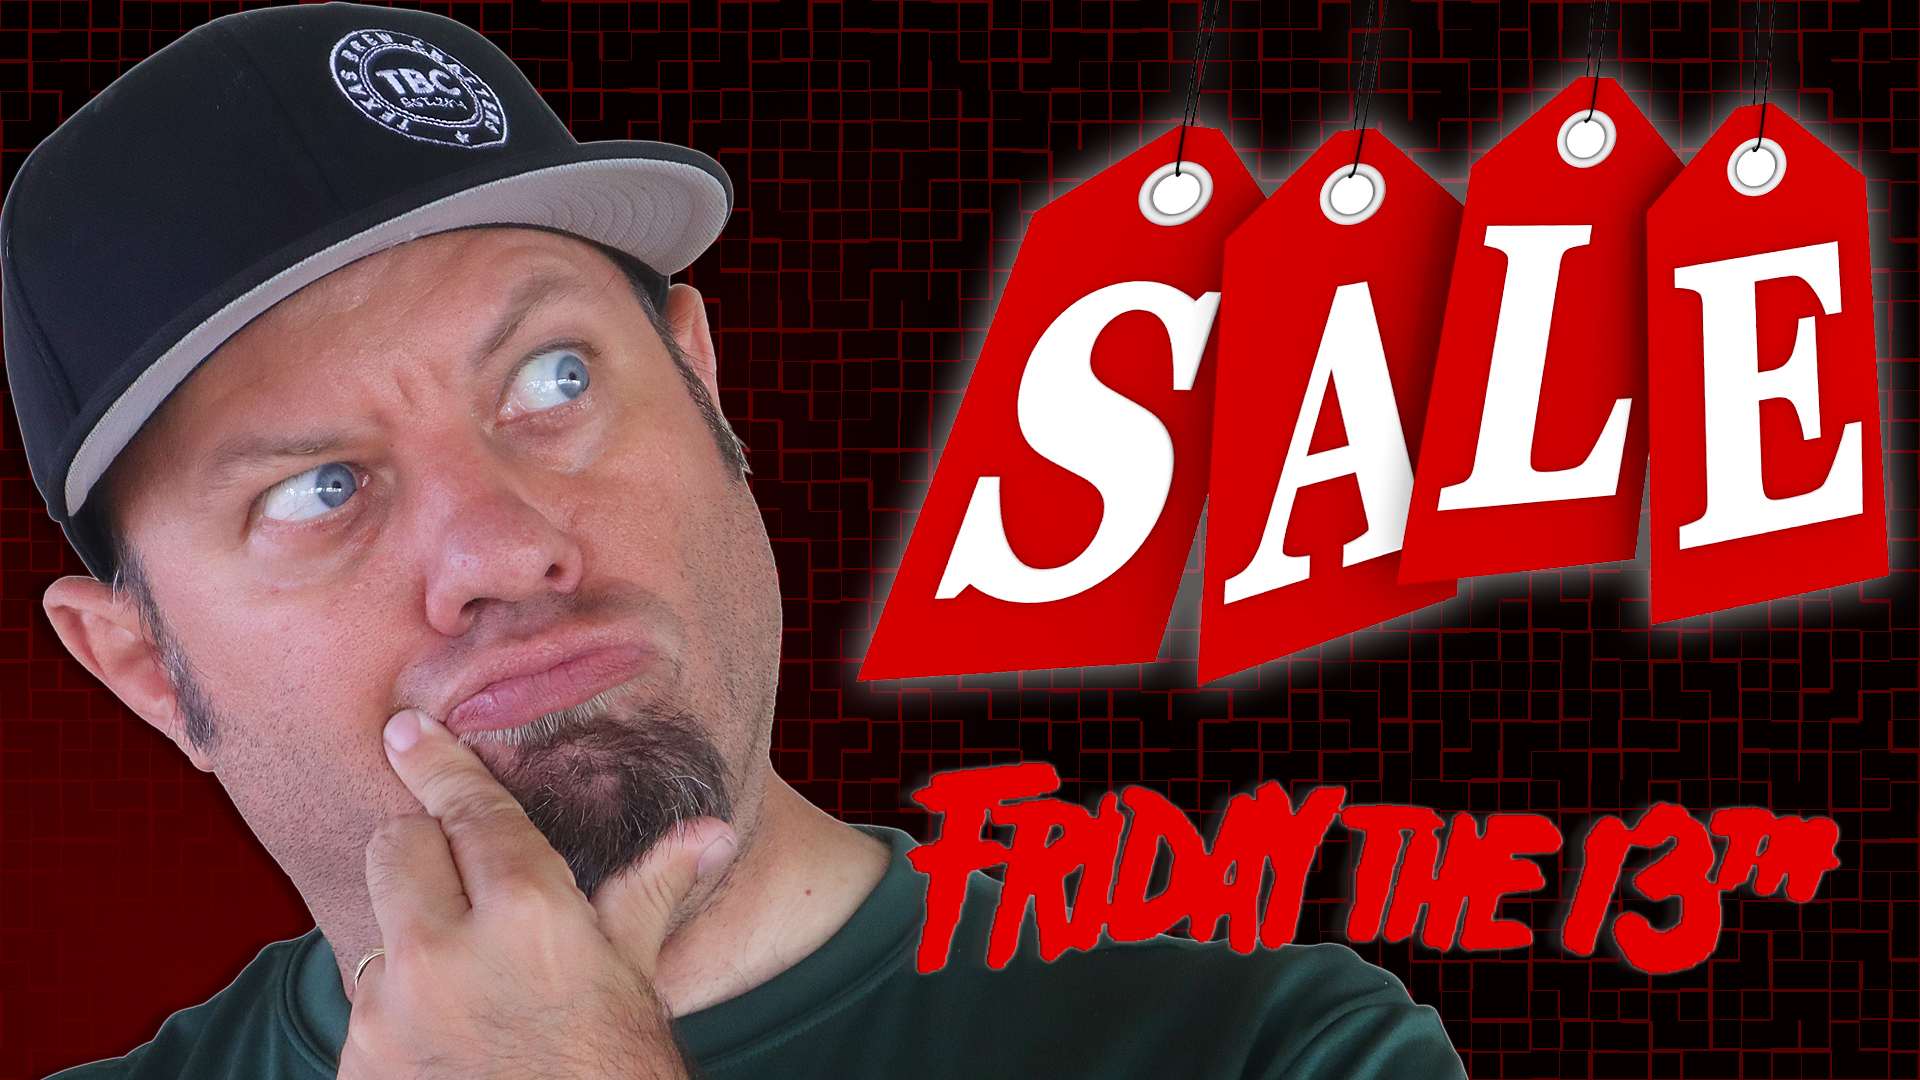 Episode 492: Ham Radio Shopping Deals for Friday The 13th, 2020